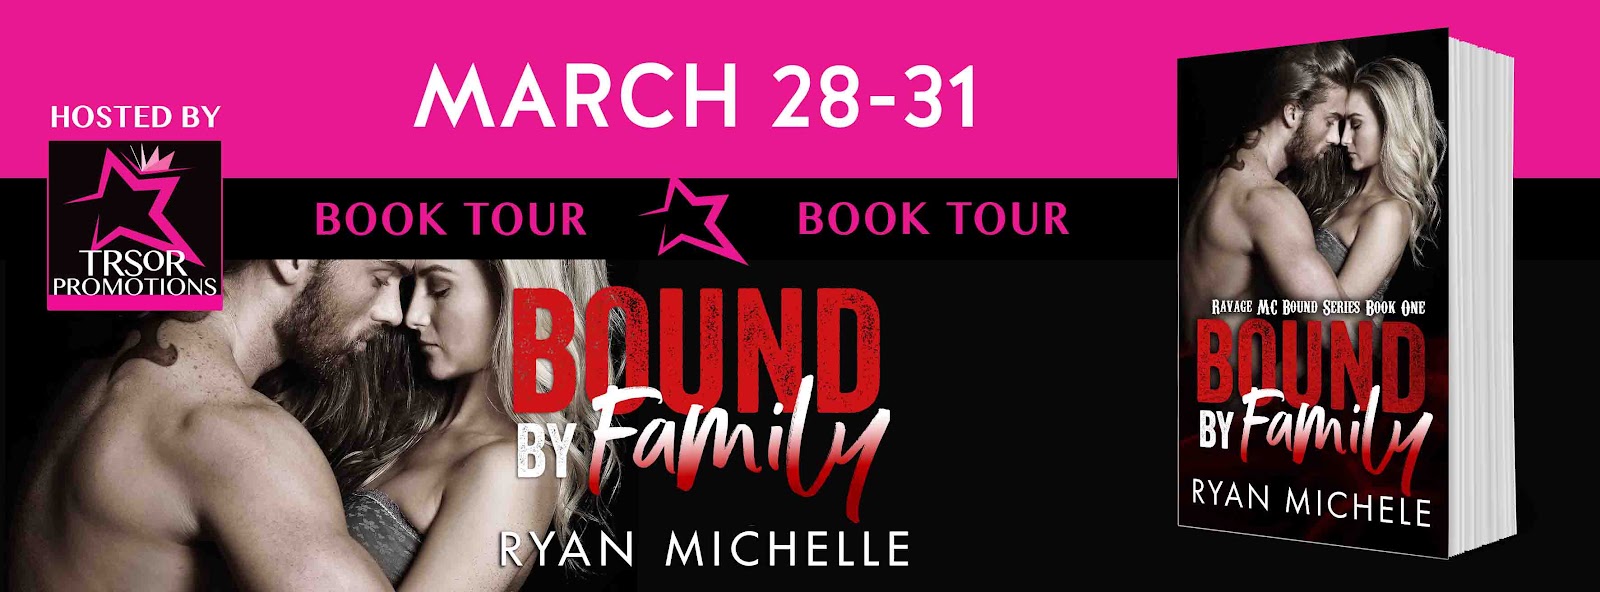 BOUND_BY_FAMILY_BOOK_TOUR.jpg